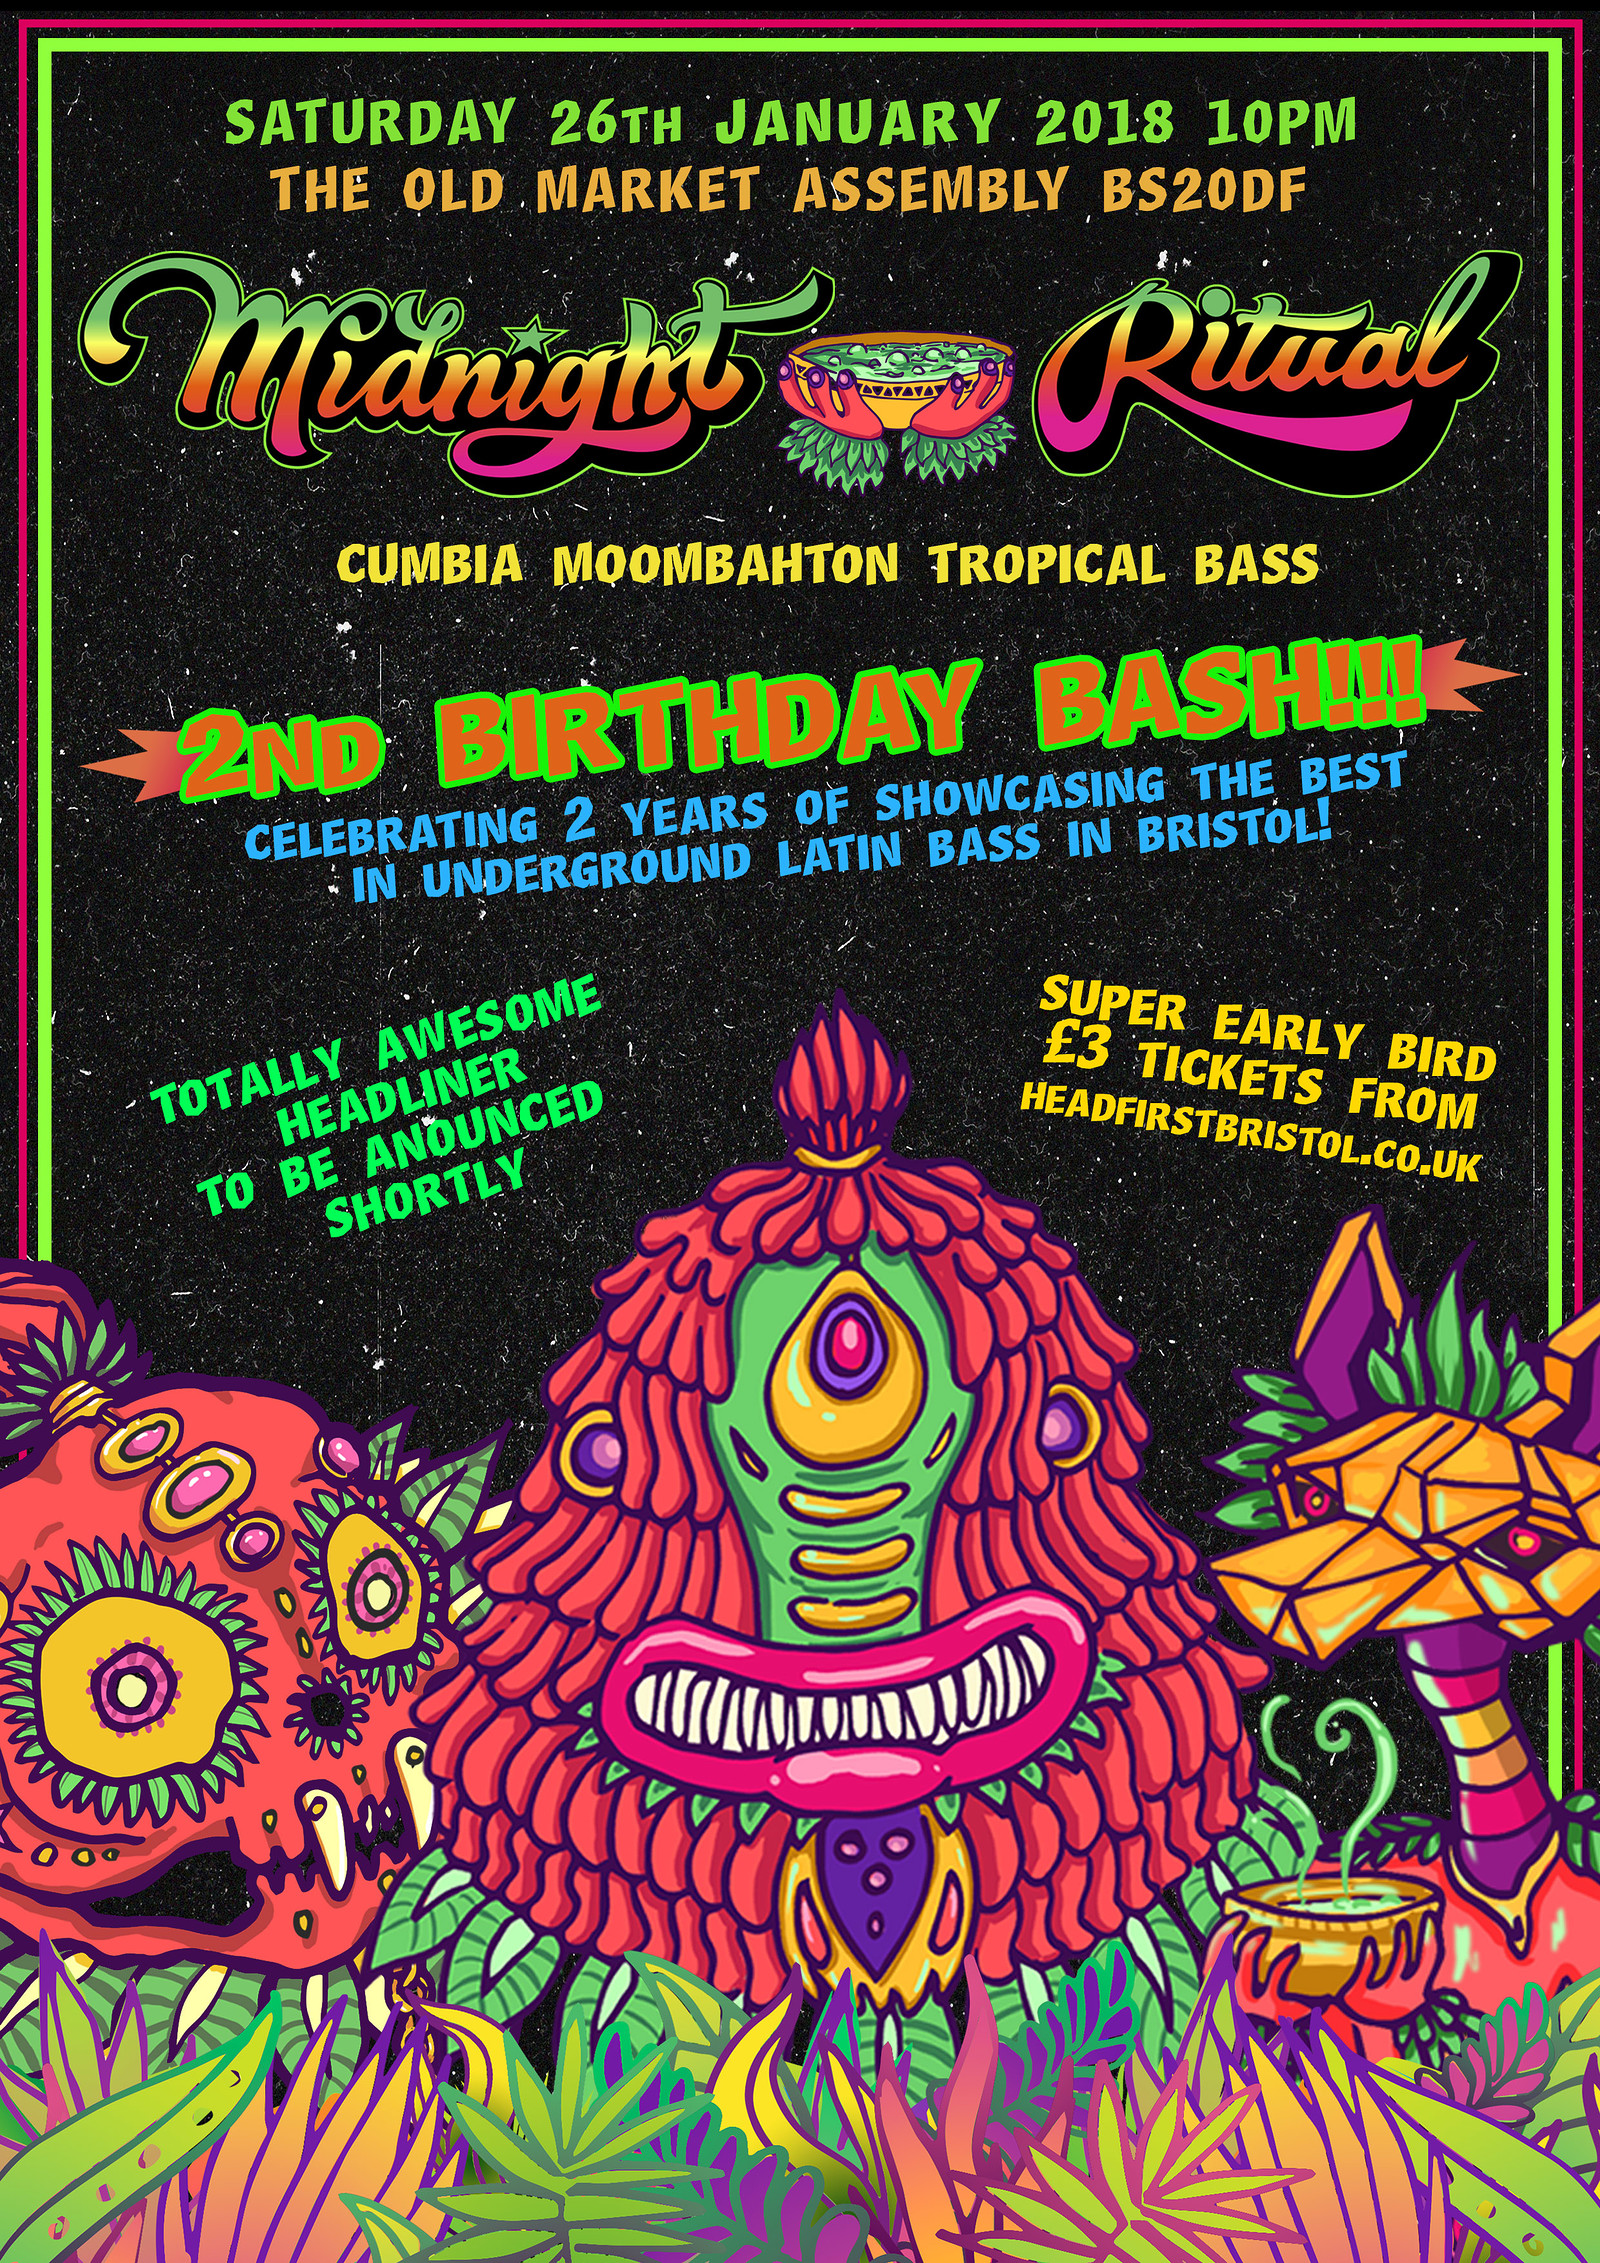 MIDNIGHT RITUAL 2ND BIRTHDAY BASH at The Old Market Assembly